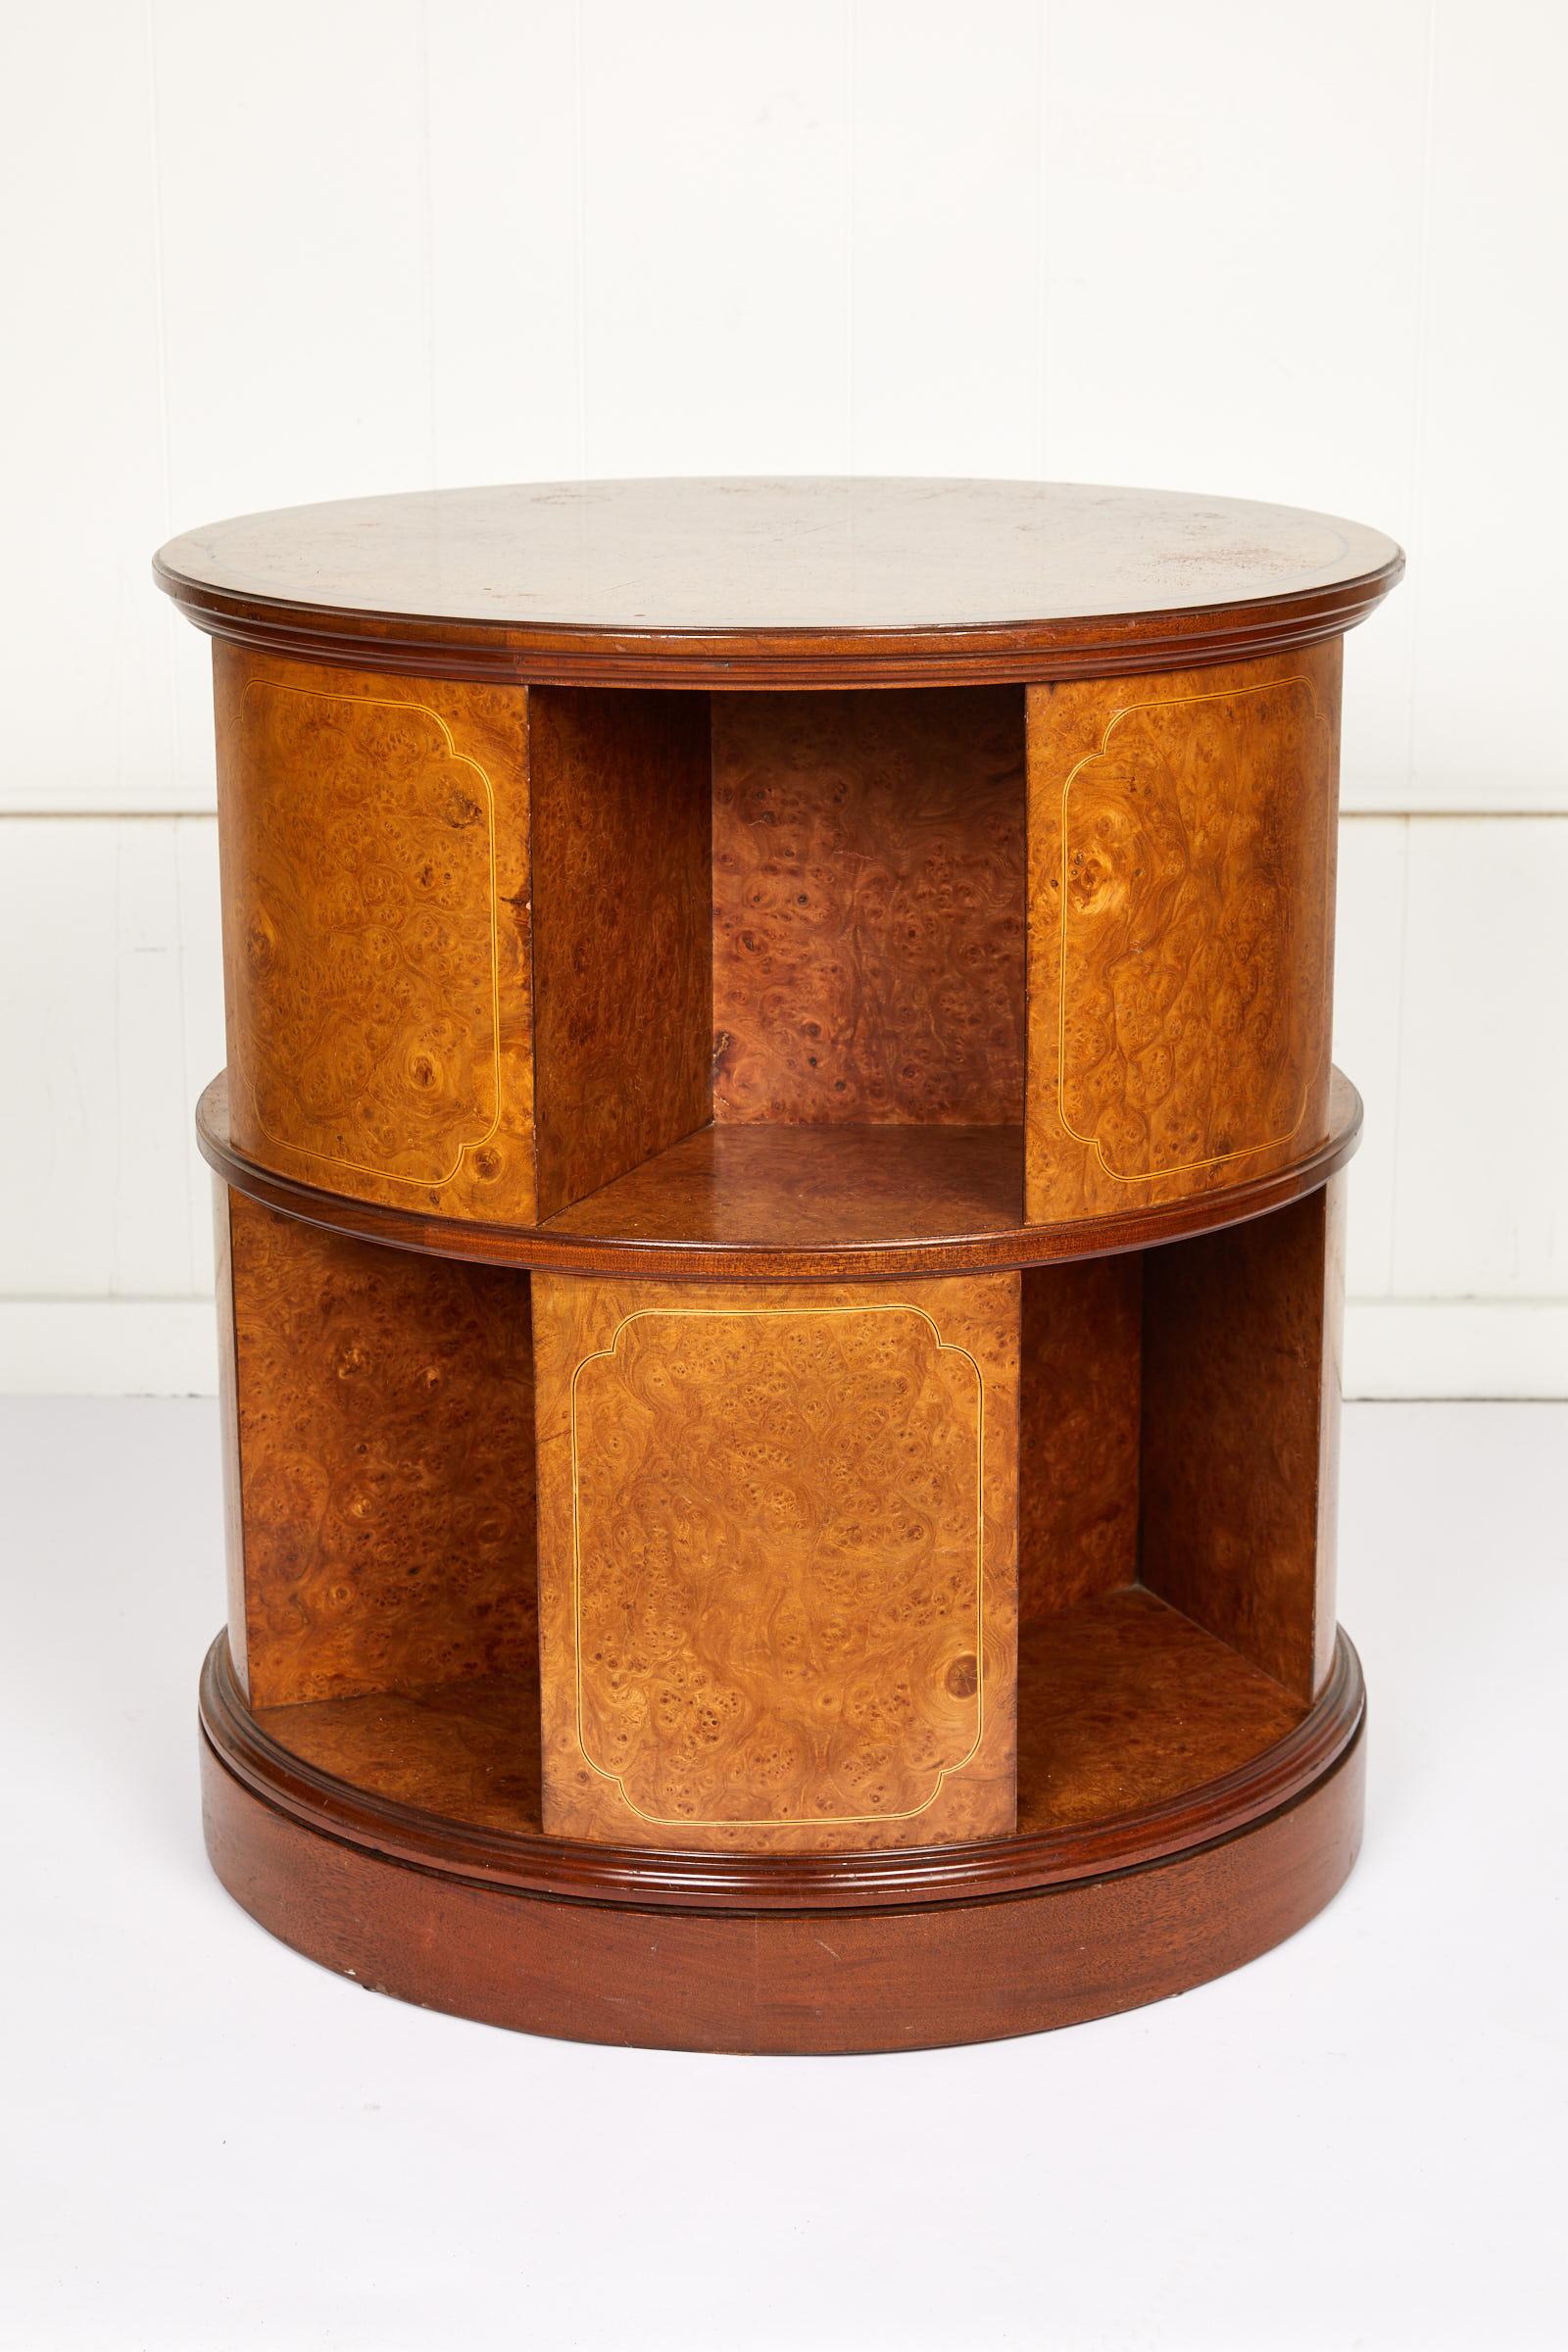 Early 20th century English round rotating library cabinet or side table made of bird's-eye maple and mahogany with satinwood and ebony decorative string inlay.